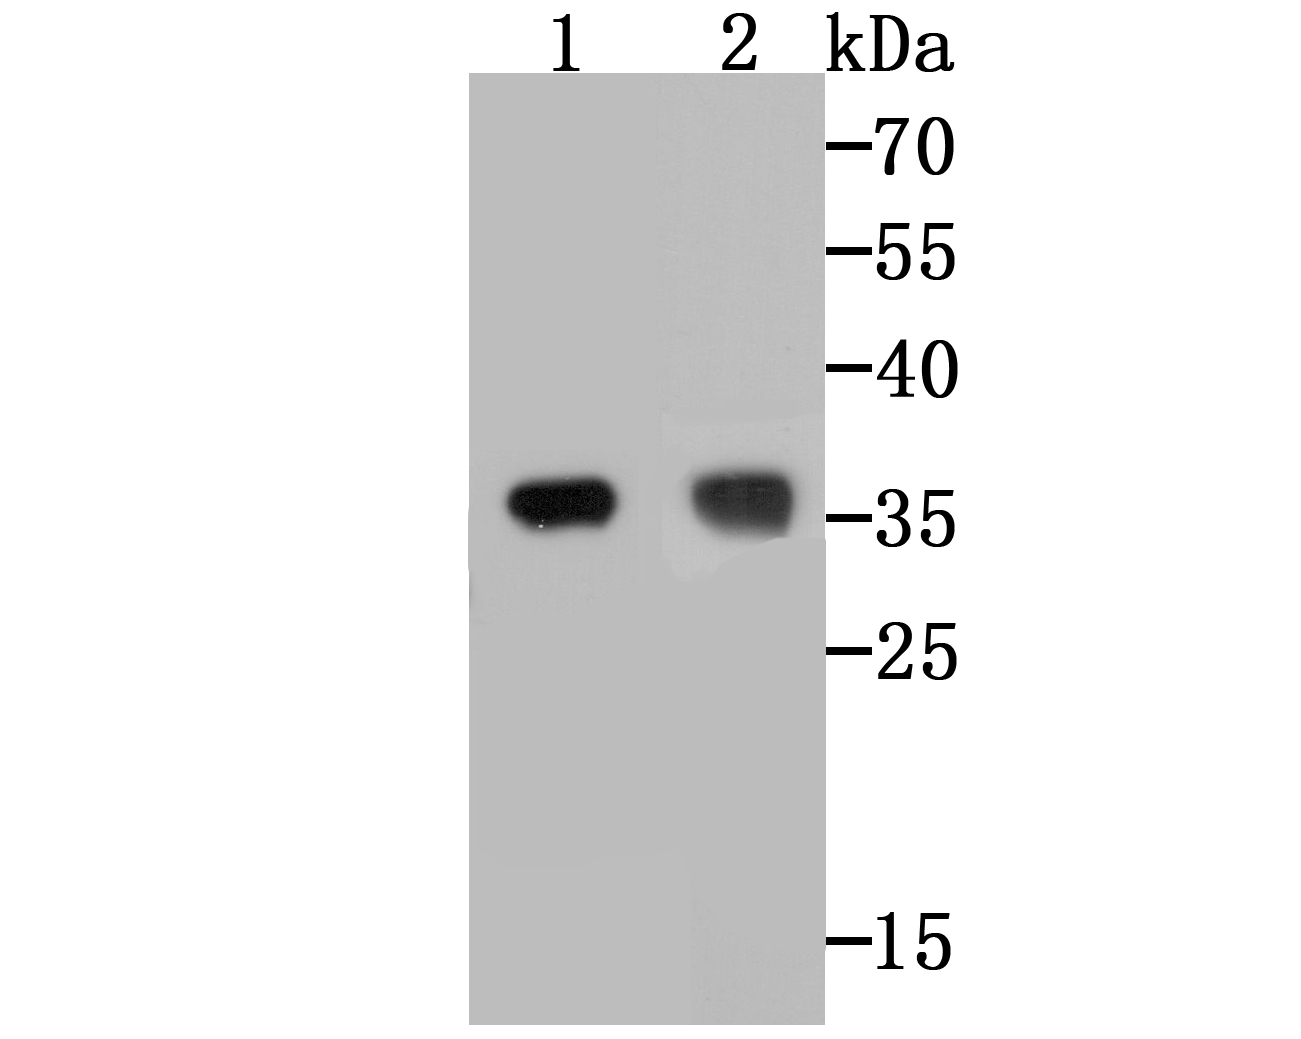 Western blot analysis of TREX1 on different lysates. Proteins were transferred to a PVDF membrane and blocked with 5% BSA in PBS for 1 hour at room temperature. The primary antibody (ET7108-16, 1/500) was used in 5% BSA at room temperature for 2 hours. Goat Anti-Rabbit IgG - HRP Secondary Antibody (HA1001) at 1:40,000 dilution was used for 1 hour at room temperature.<br />
Positive control: <br />
Lane 1: A431 cell lysate<br />
Lane 2: SK-Br-3 cell lysate